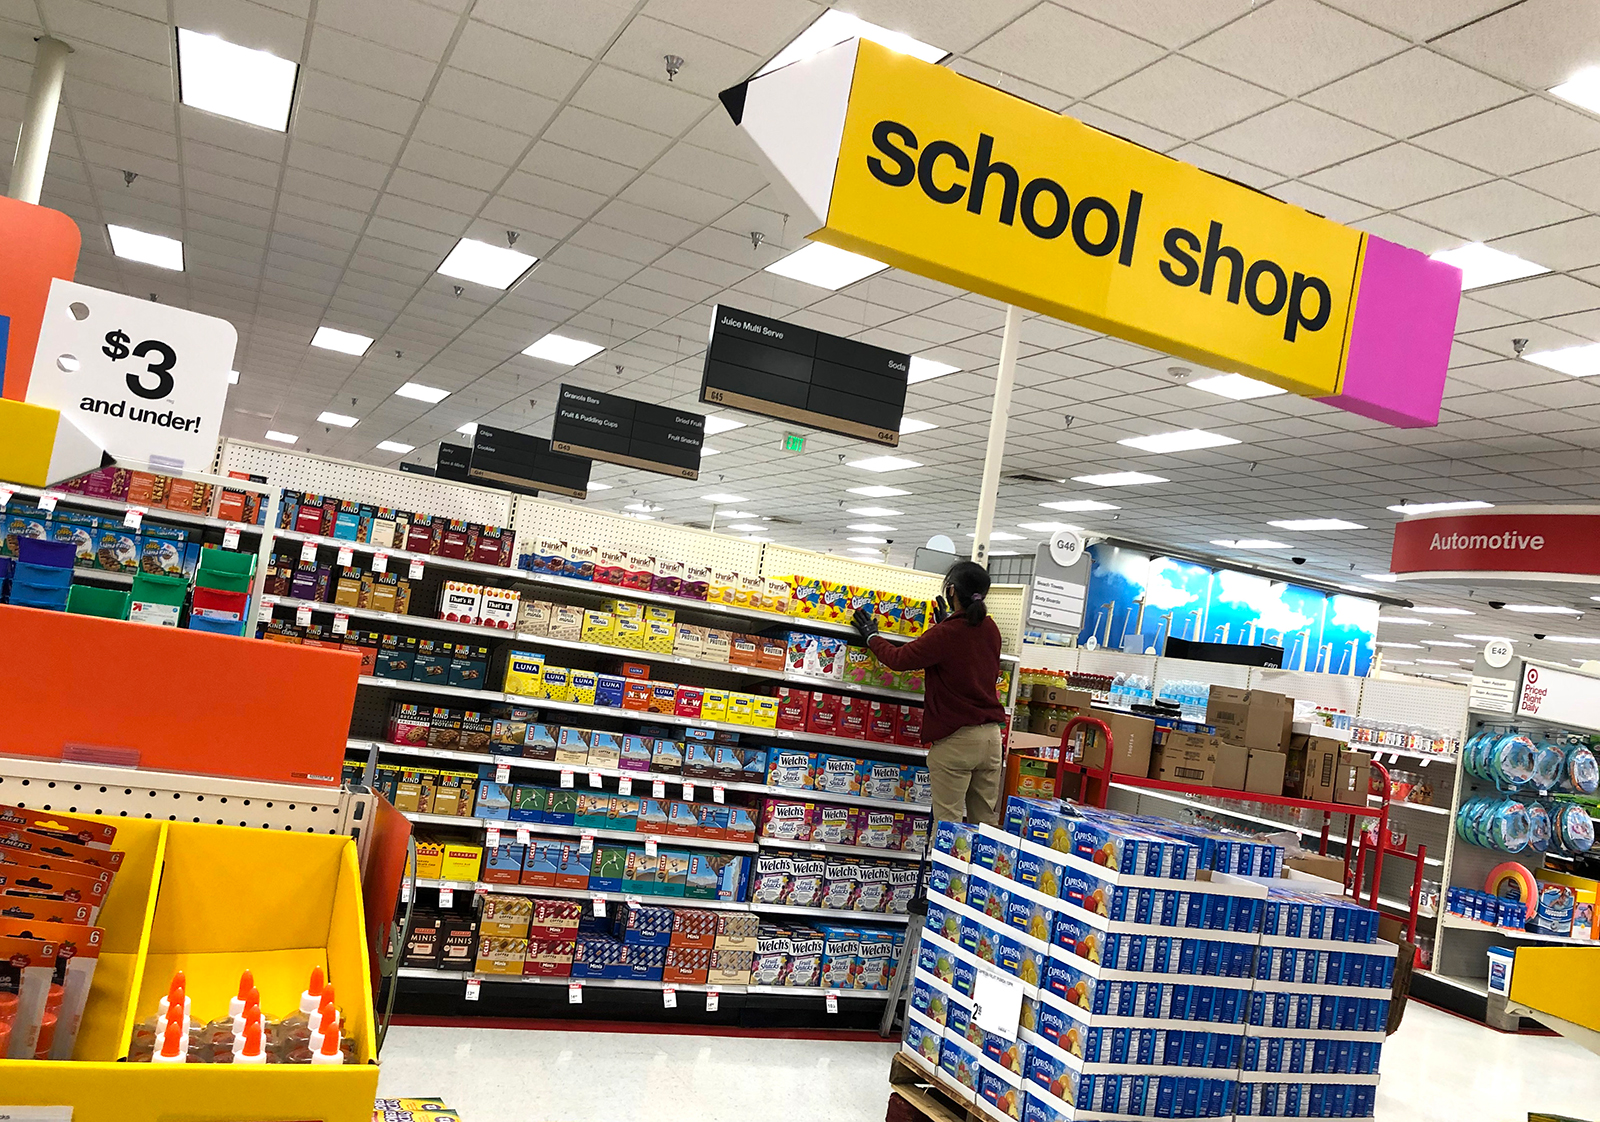 A worker stocks shelves of back-to-school supplies at a Target store on August 3, in Colma, California. In the midst of the ongoing coronavirus pandemic, back-to-school shopping has mostly moved to online sales, with purchases shifting from clothing to laptop computers and home schooling supplies.